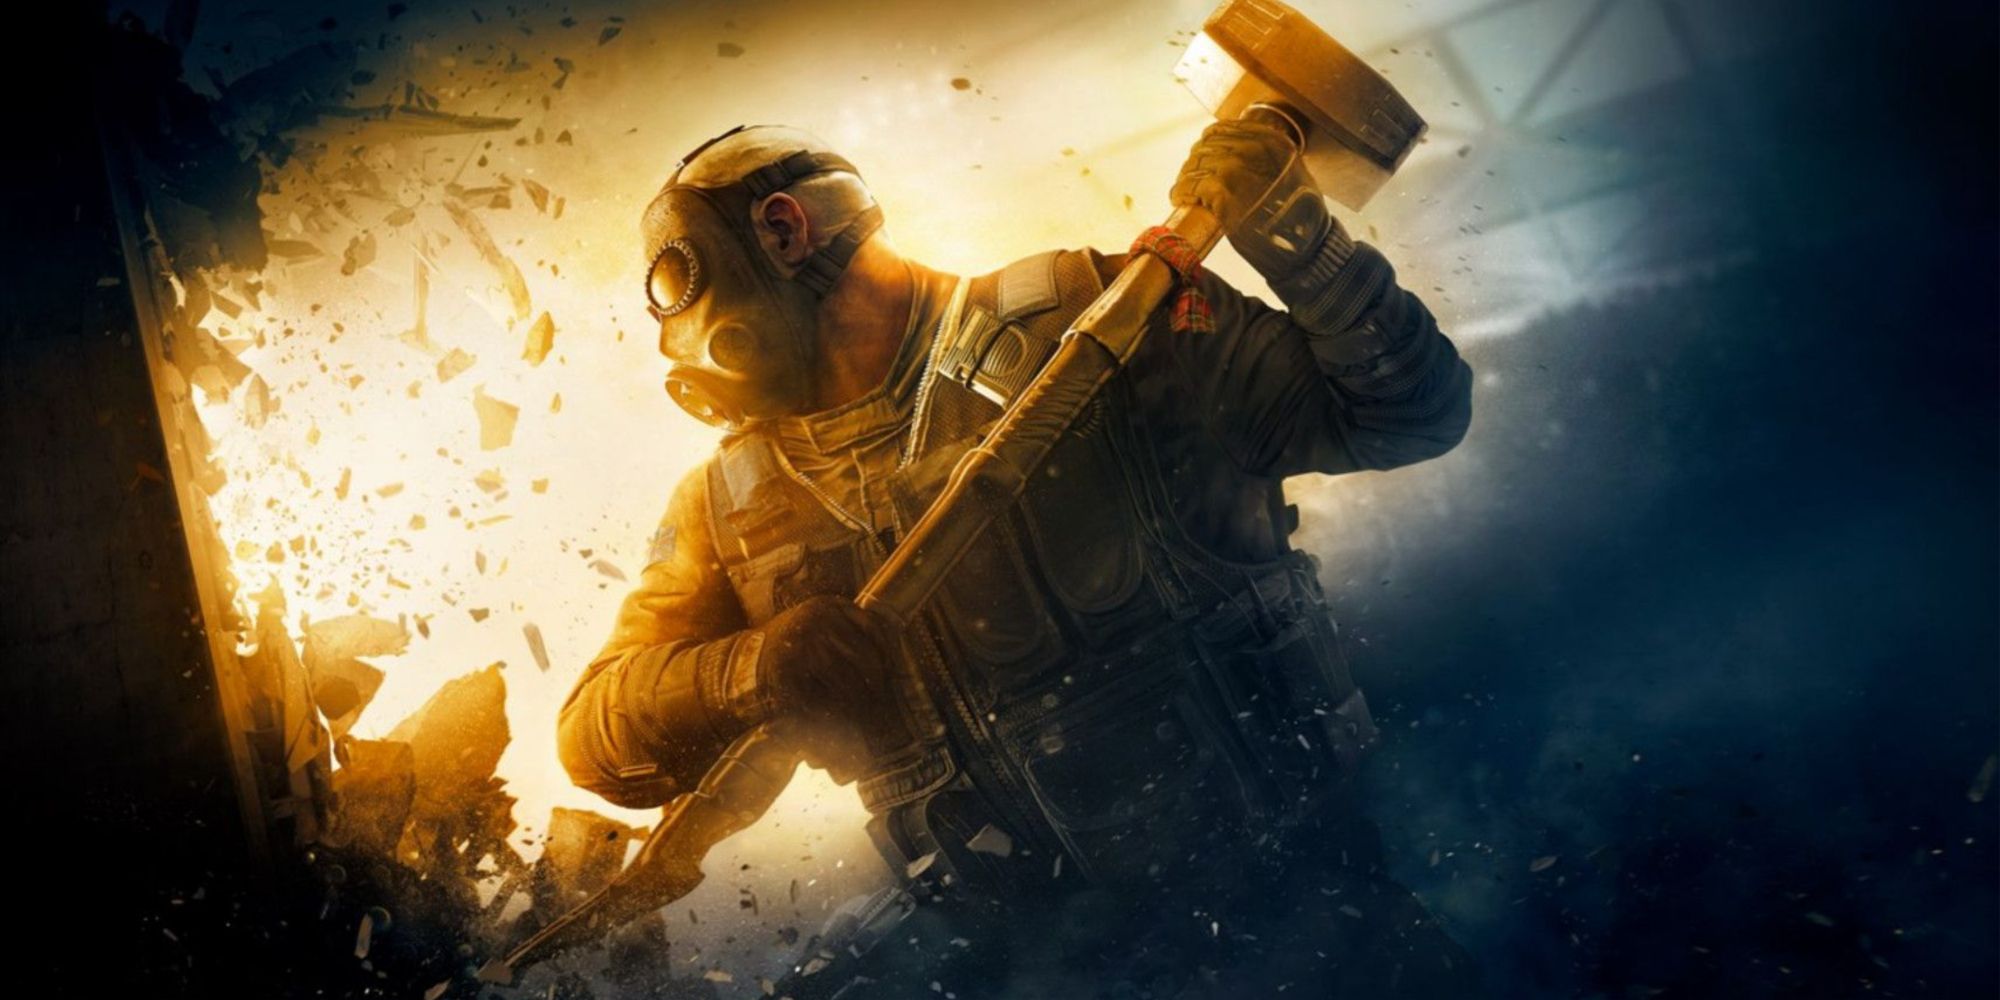 Rainbow Six Siege: Sledge breaking a wall with his hammer